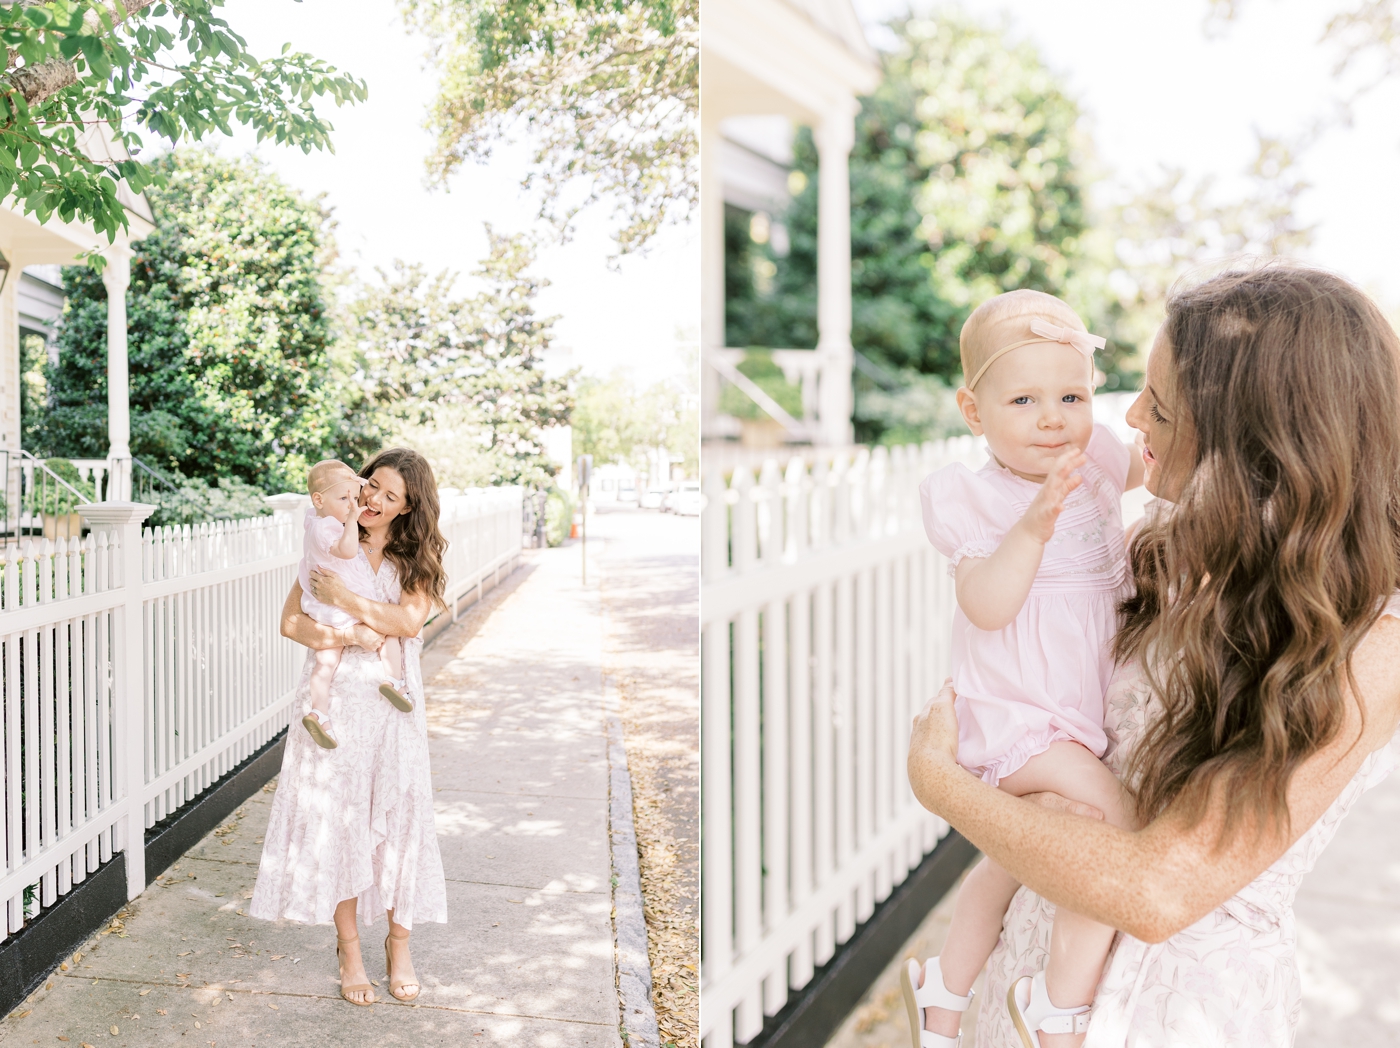 Mom in flowy dress holding baby daughter | Photo by Caitlyn Motycka Photography.